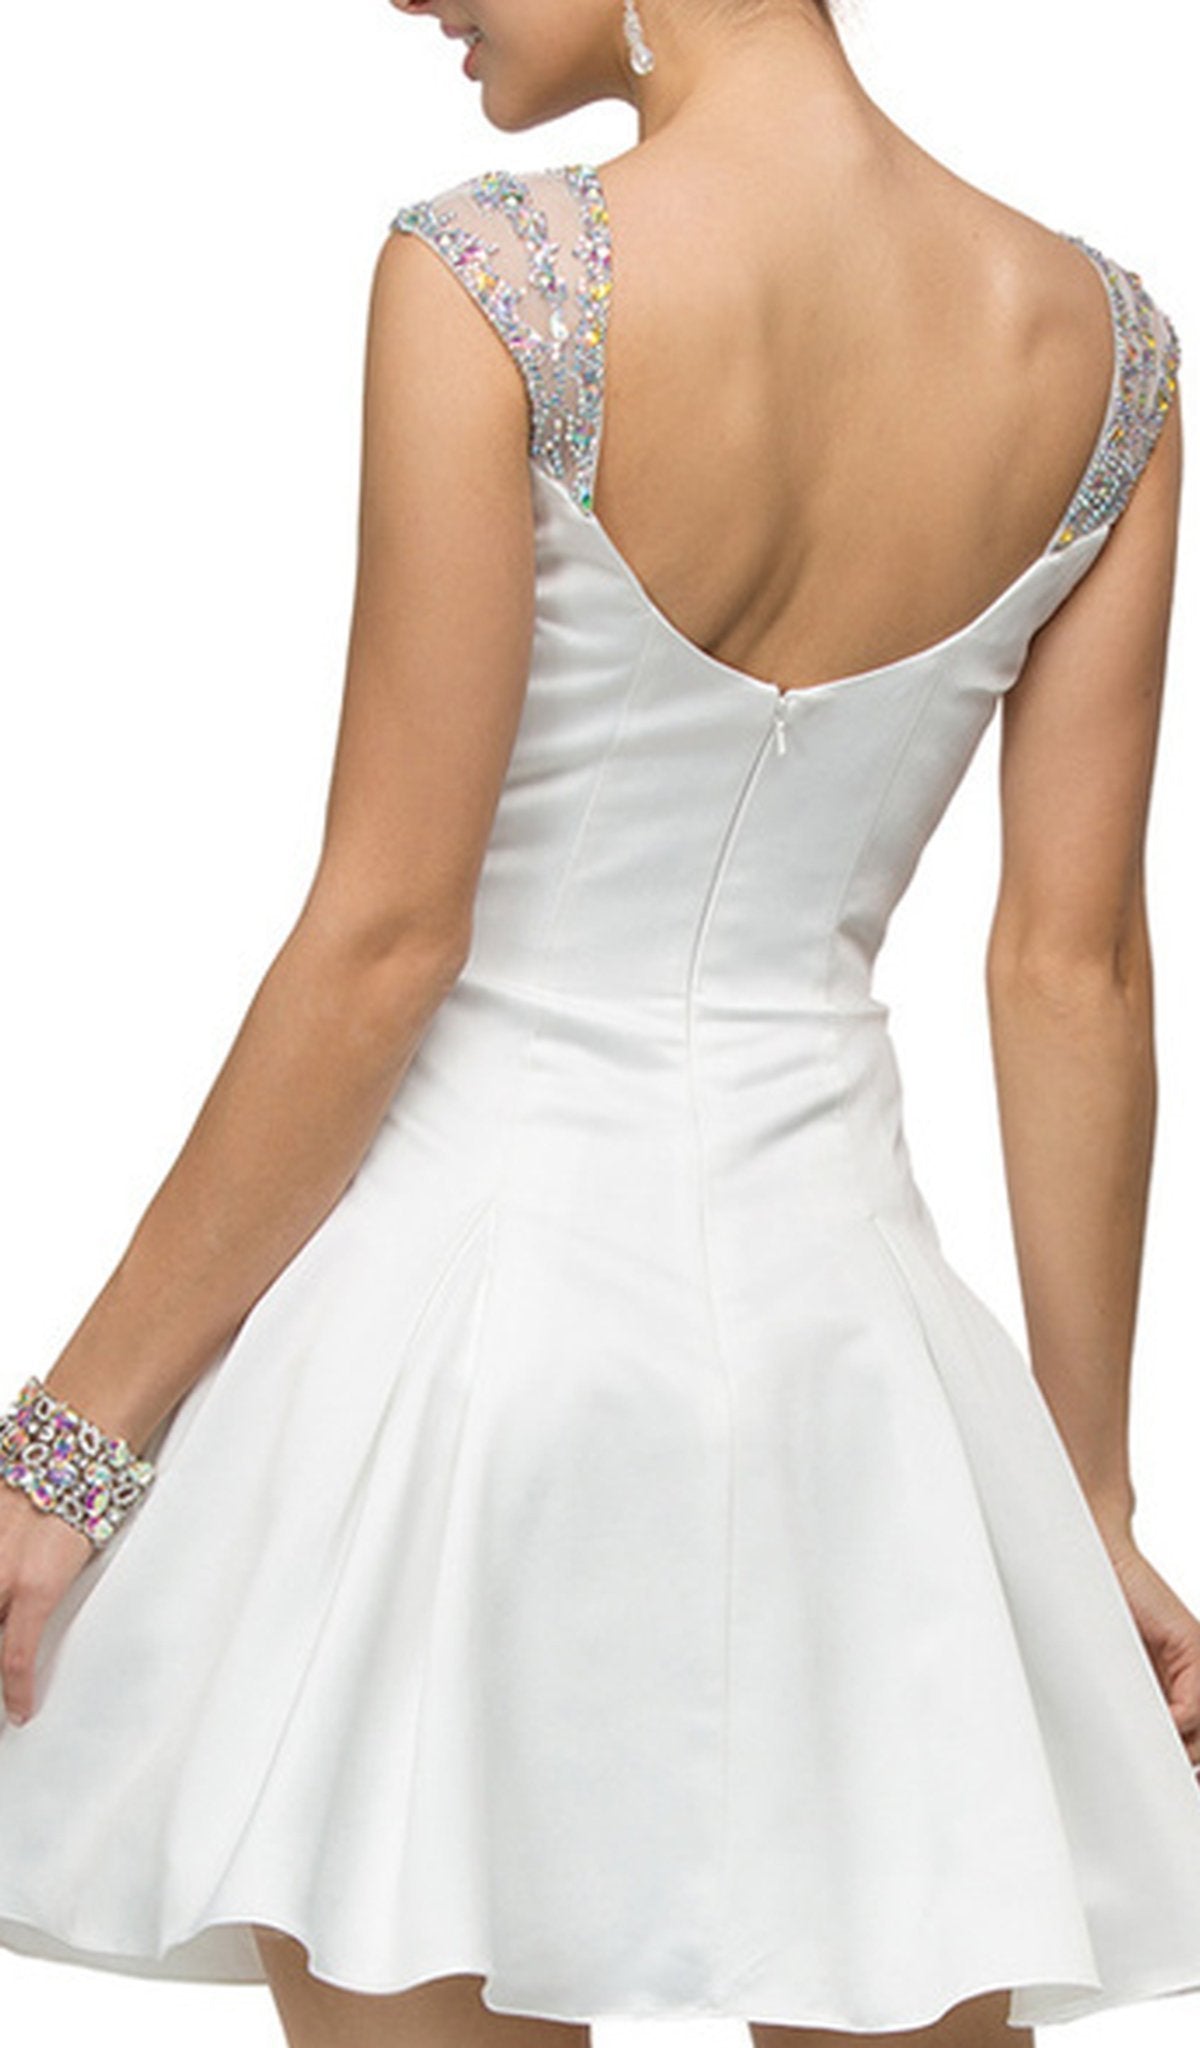 Dancing Queen - 9476 Jeweled Cap Sleeve Sweetheart Satin Cocktail Dress Cocktail Dresses